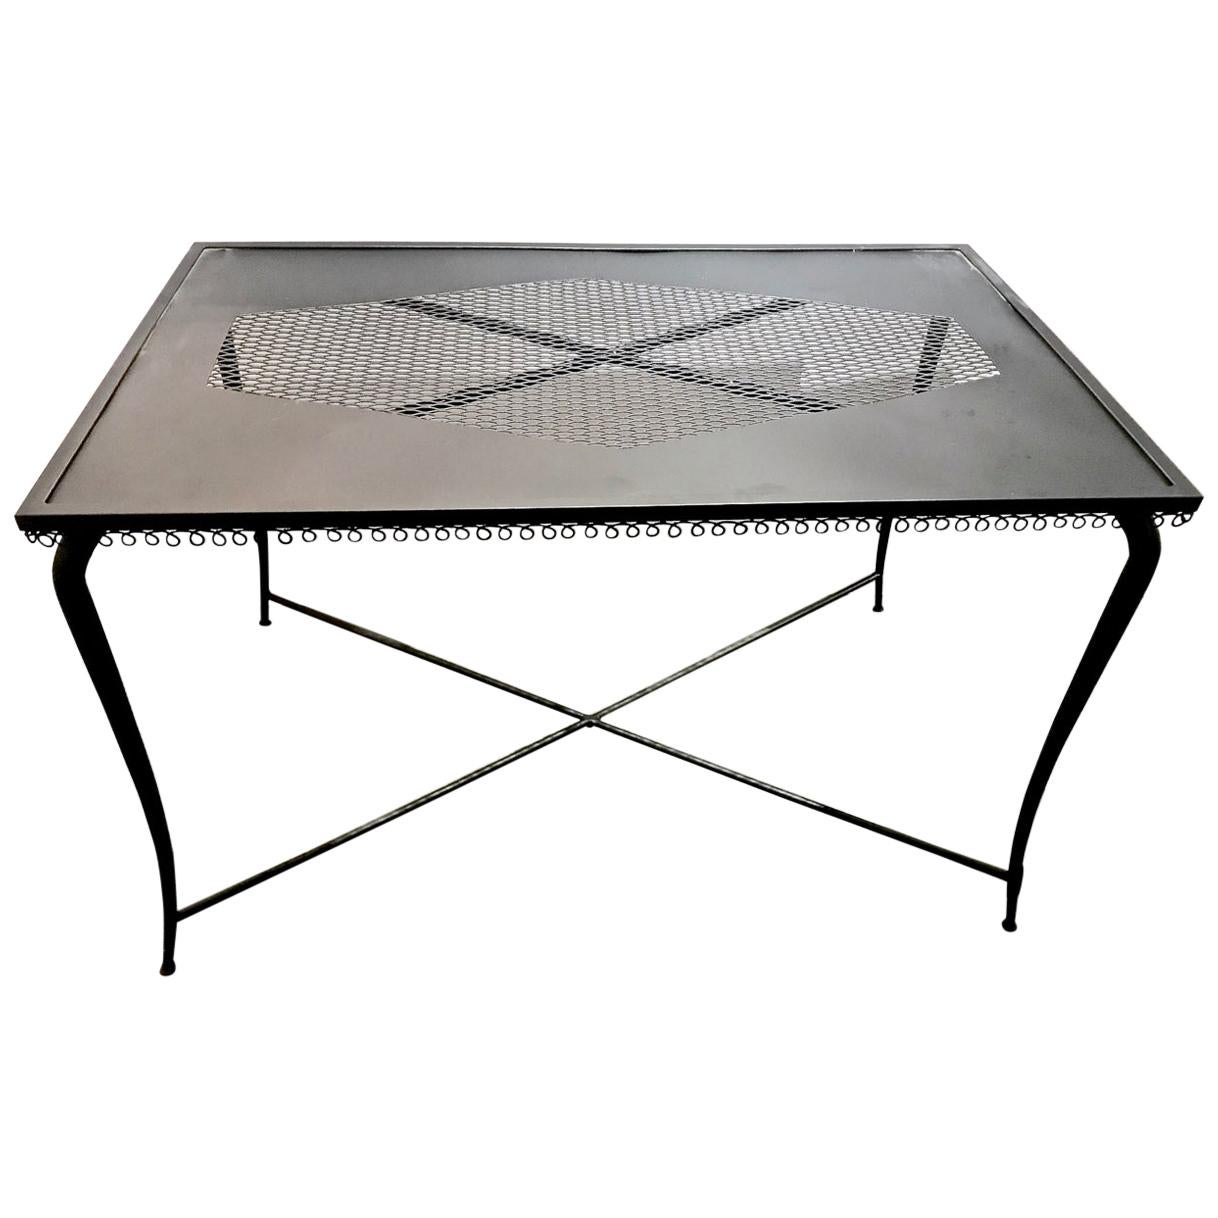 French Perforated Iron Table, Attributed to Mathieu Mategot 